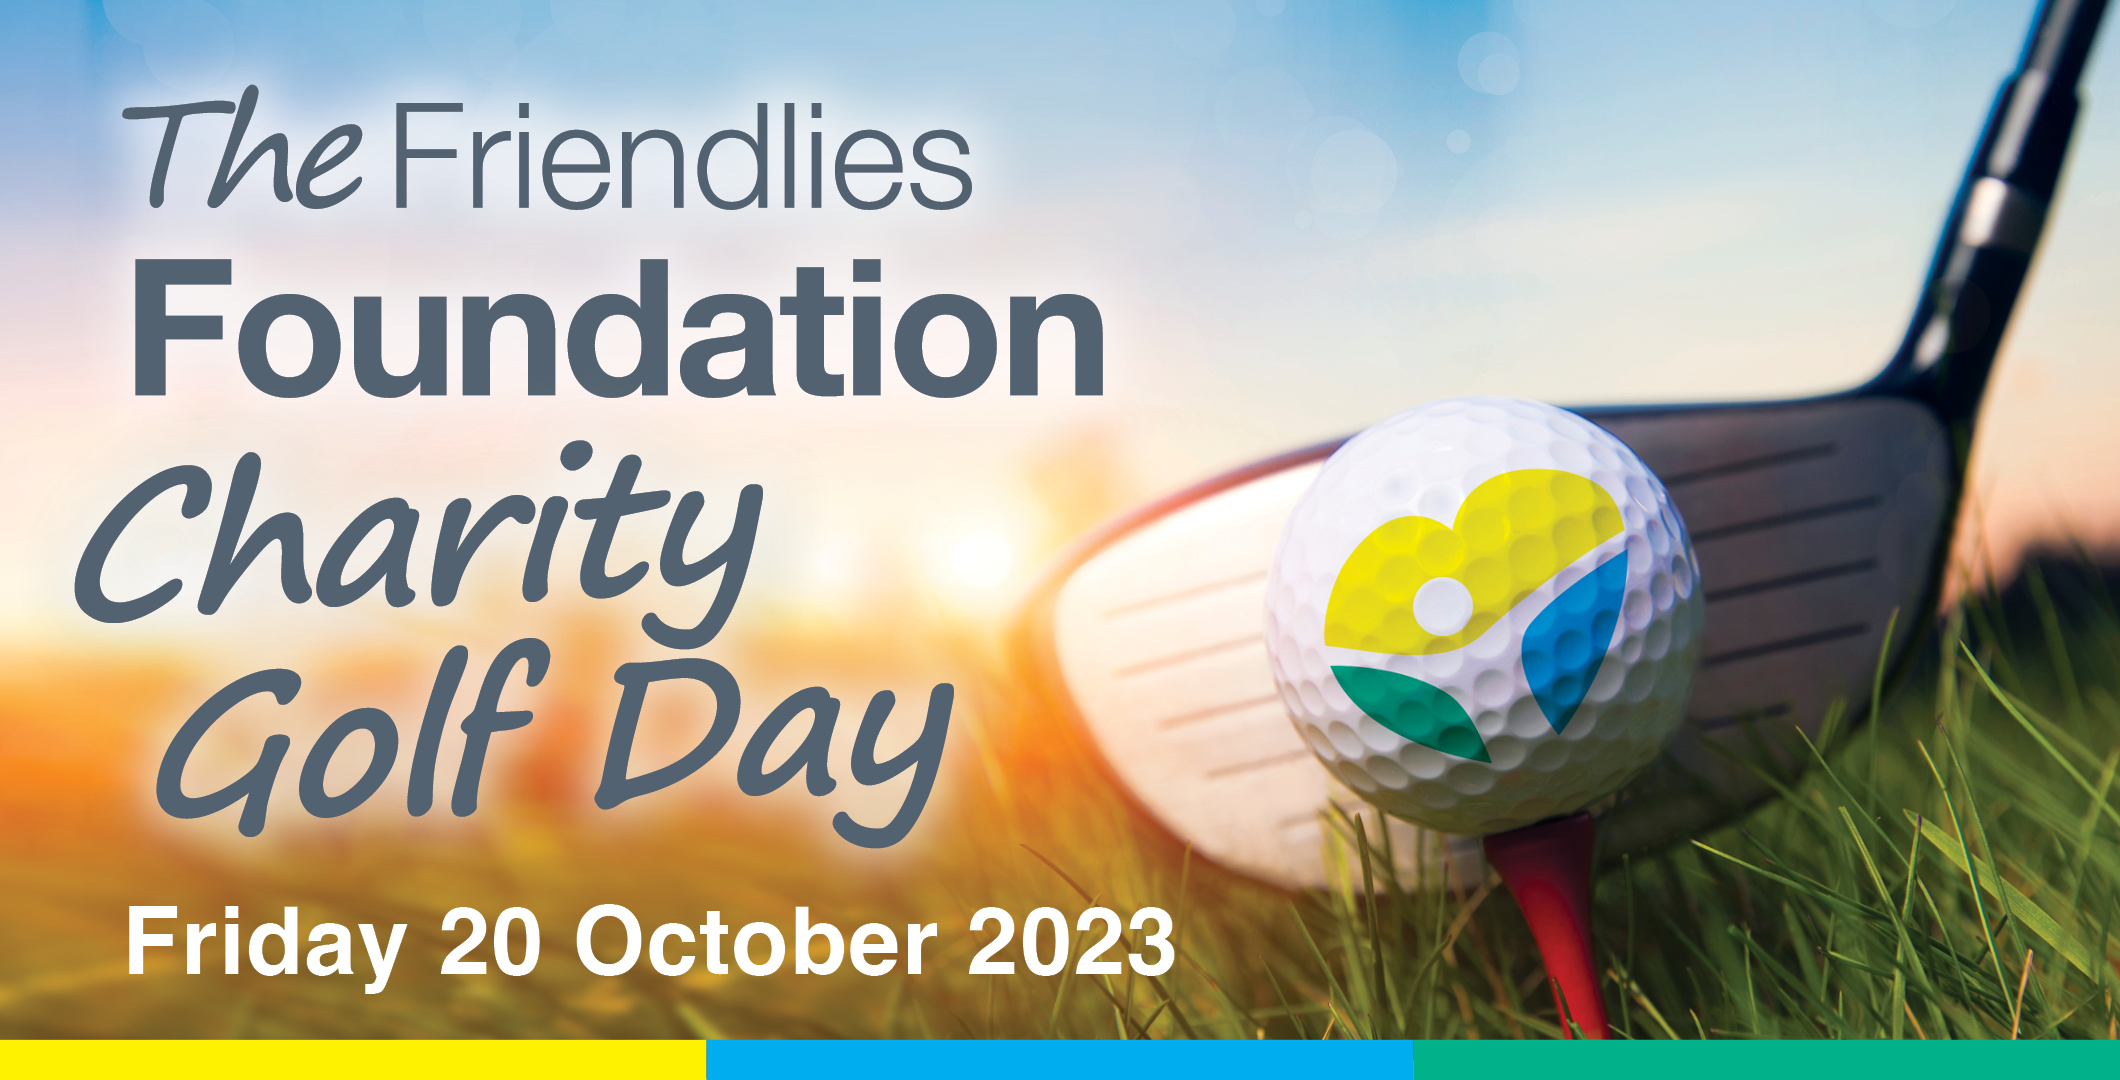 The Friendlies Foundation Charity Golf Day 2023